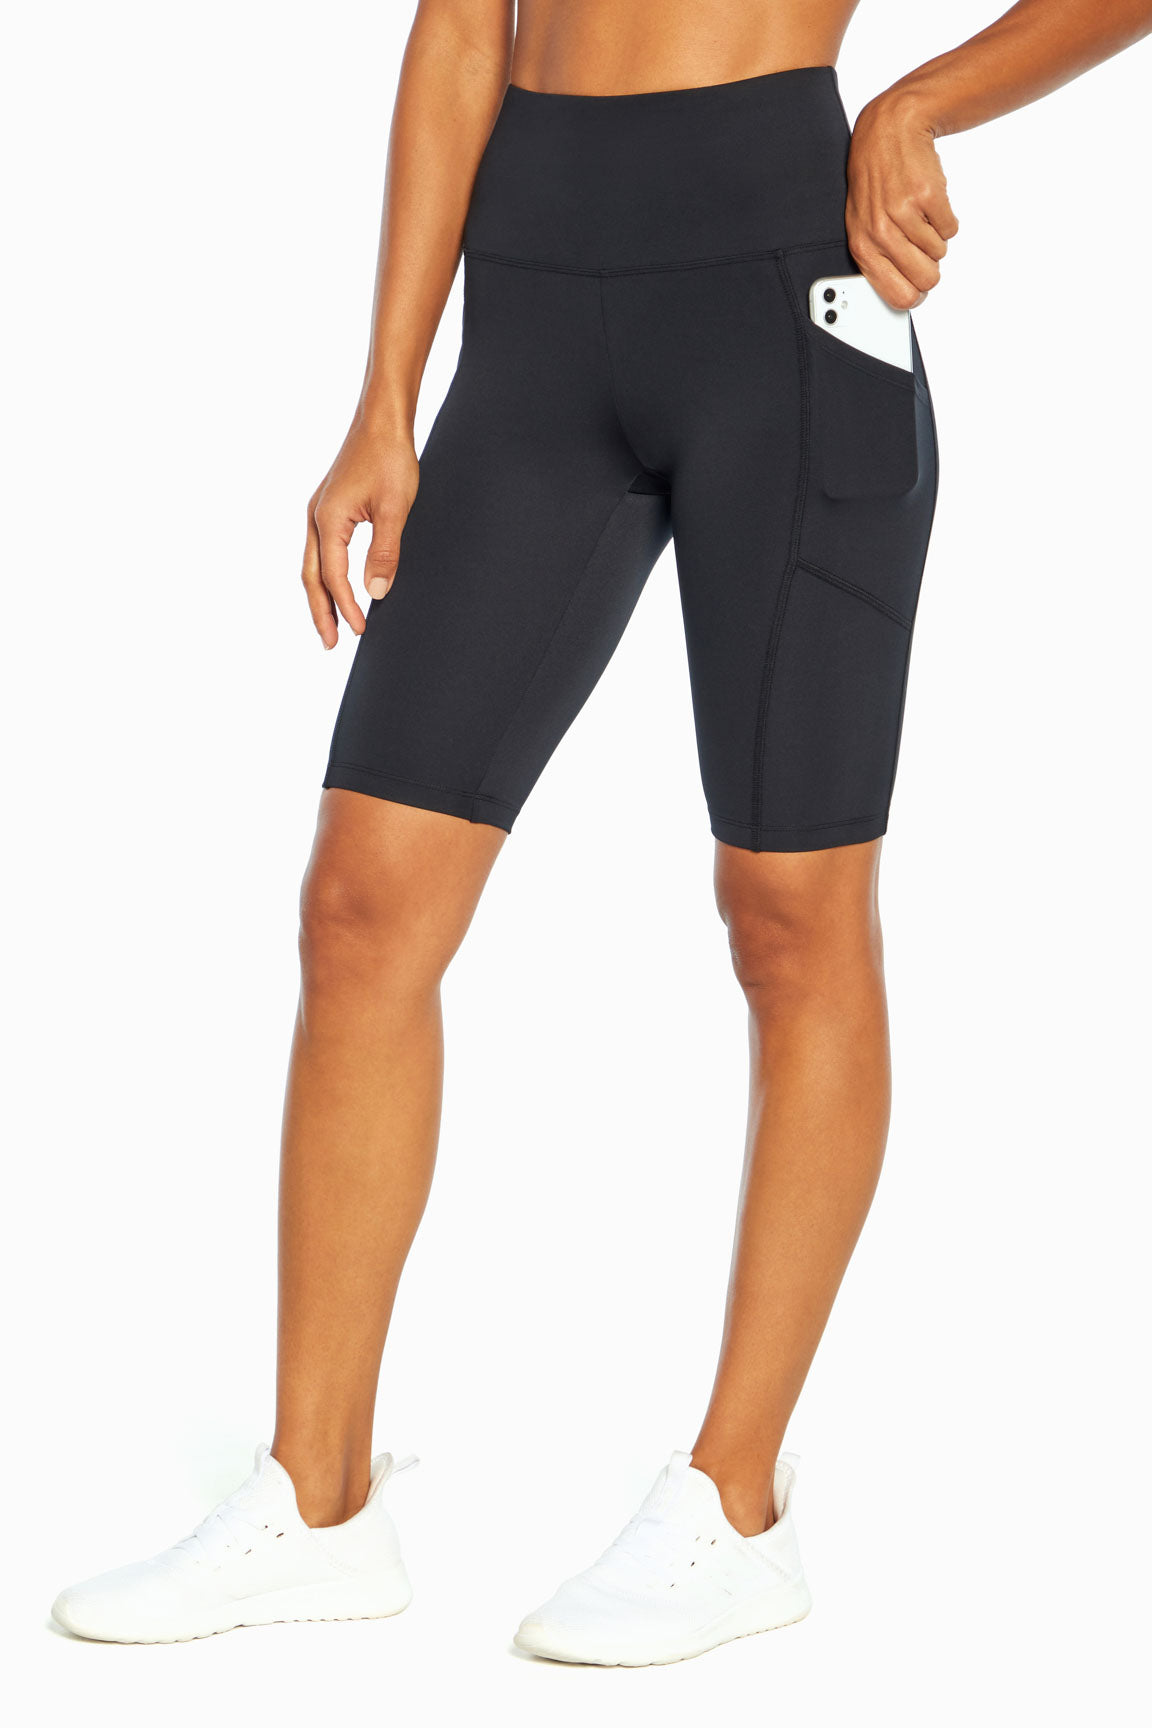  Bally Total Fitness Womens Standard The Legacy Tummy Control  Pant